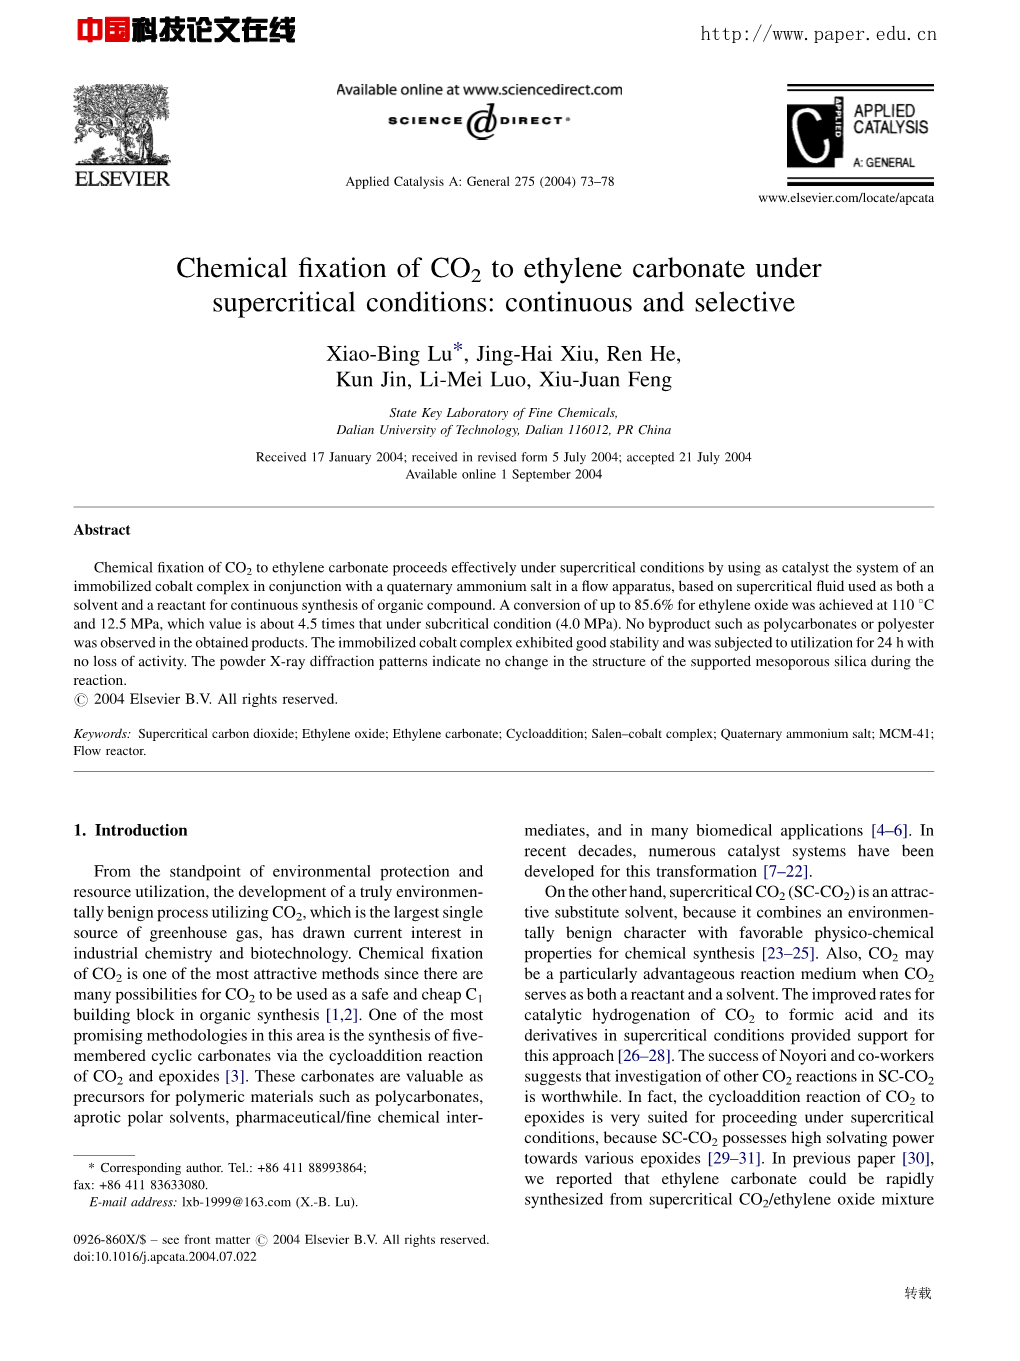 Chemical Fixation of CO2 to Ethylene Carbonate